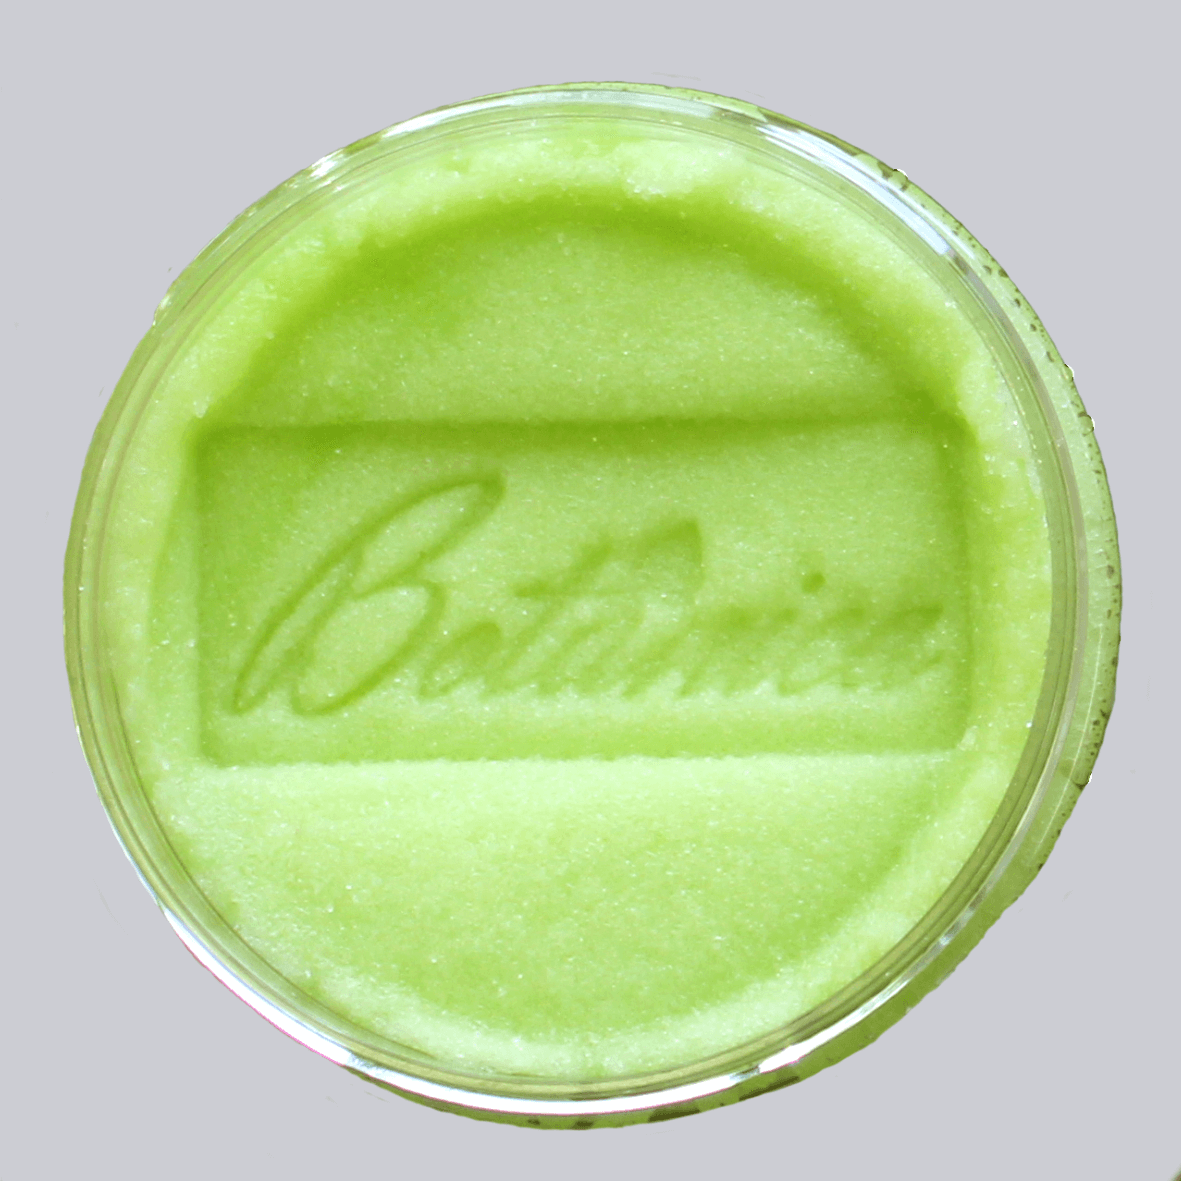 Open jar of sugar body scrub showing the texture, stamped Botanica AlpacaSoaps Alpaca Soaps, Lime green color Coconut Lime Verbena